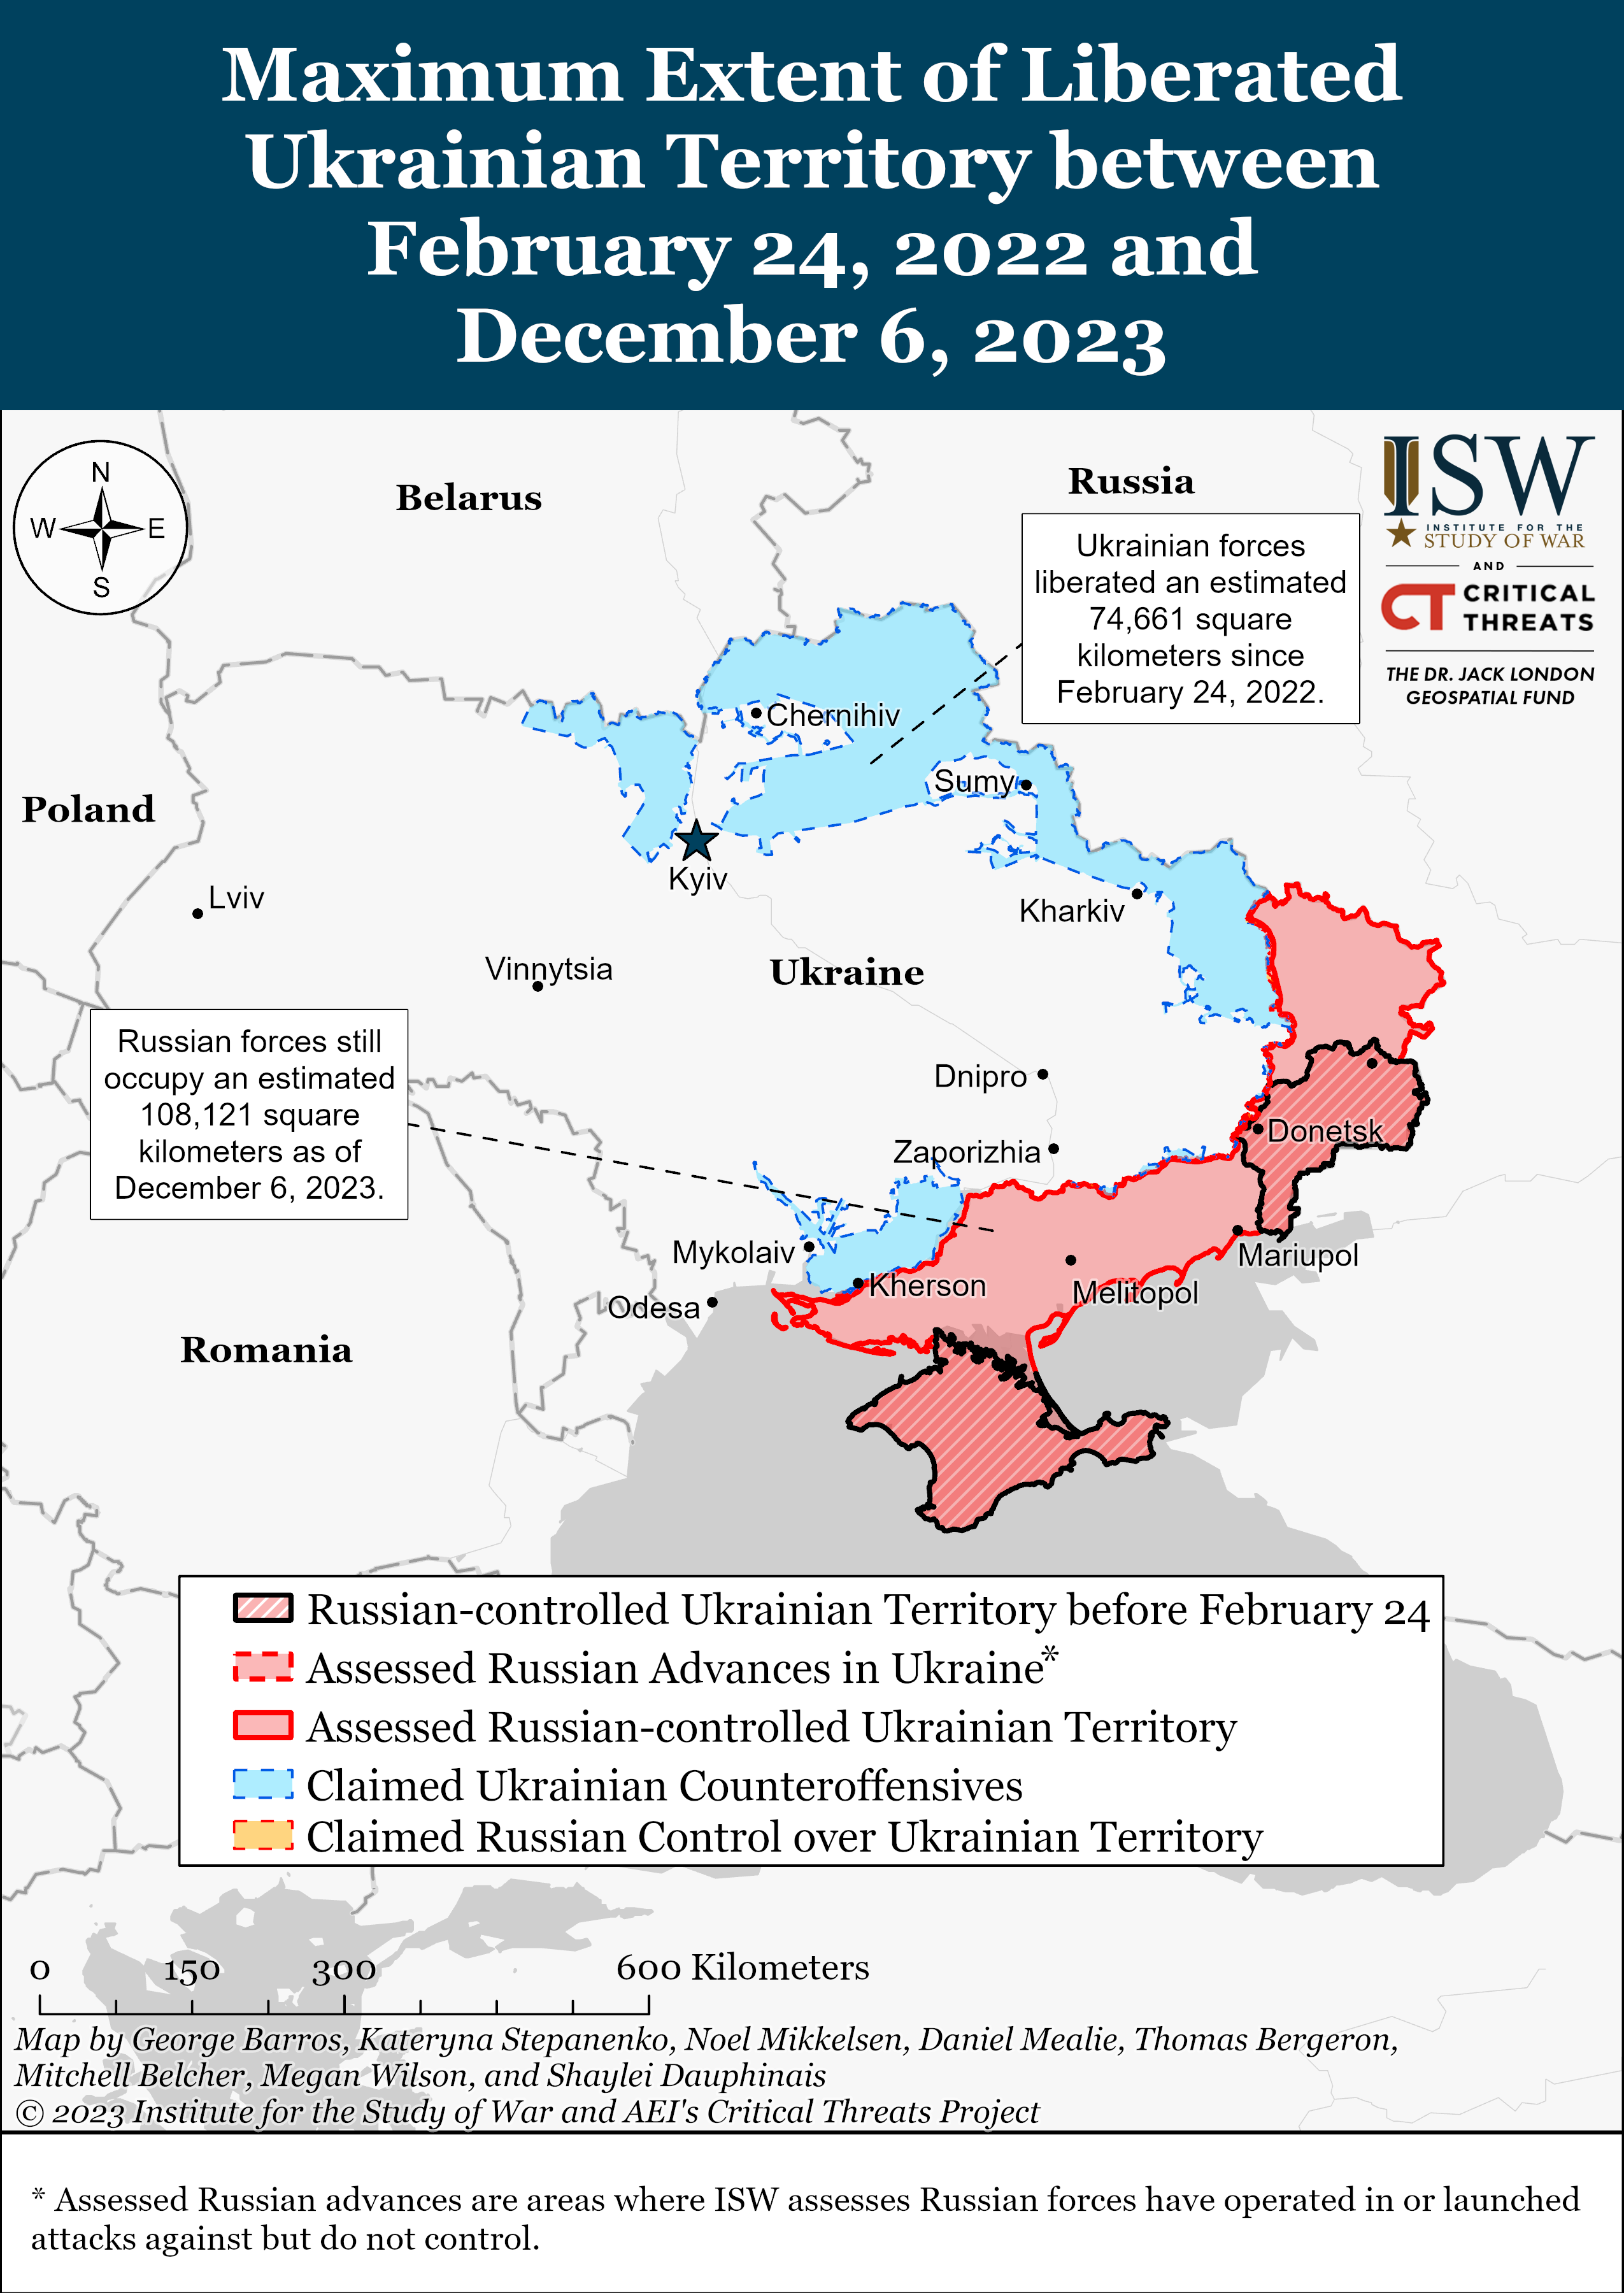 Russian Offensive Campaign Assessment, January 5, 2023